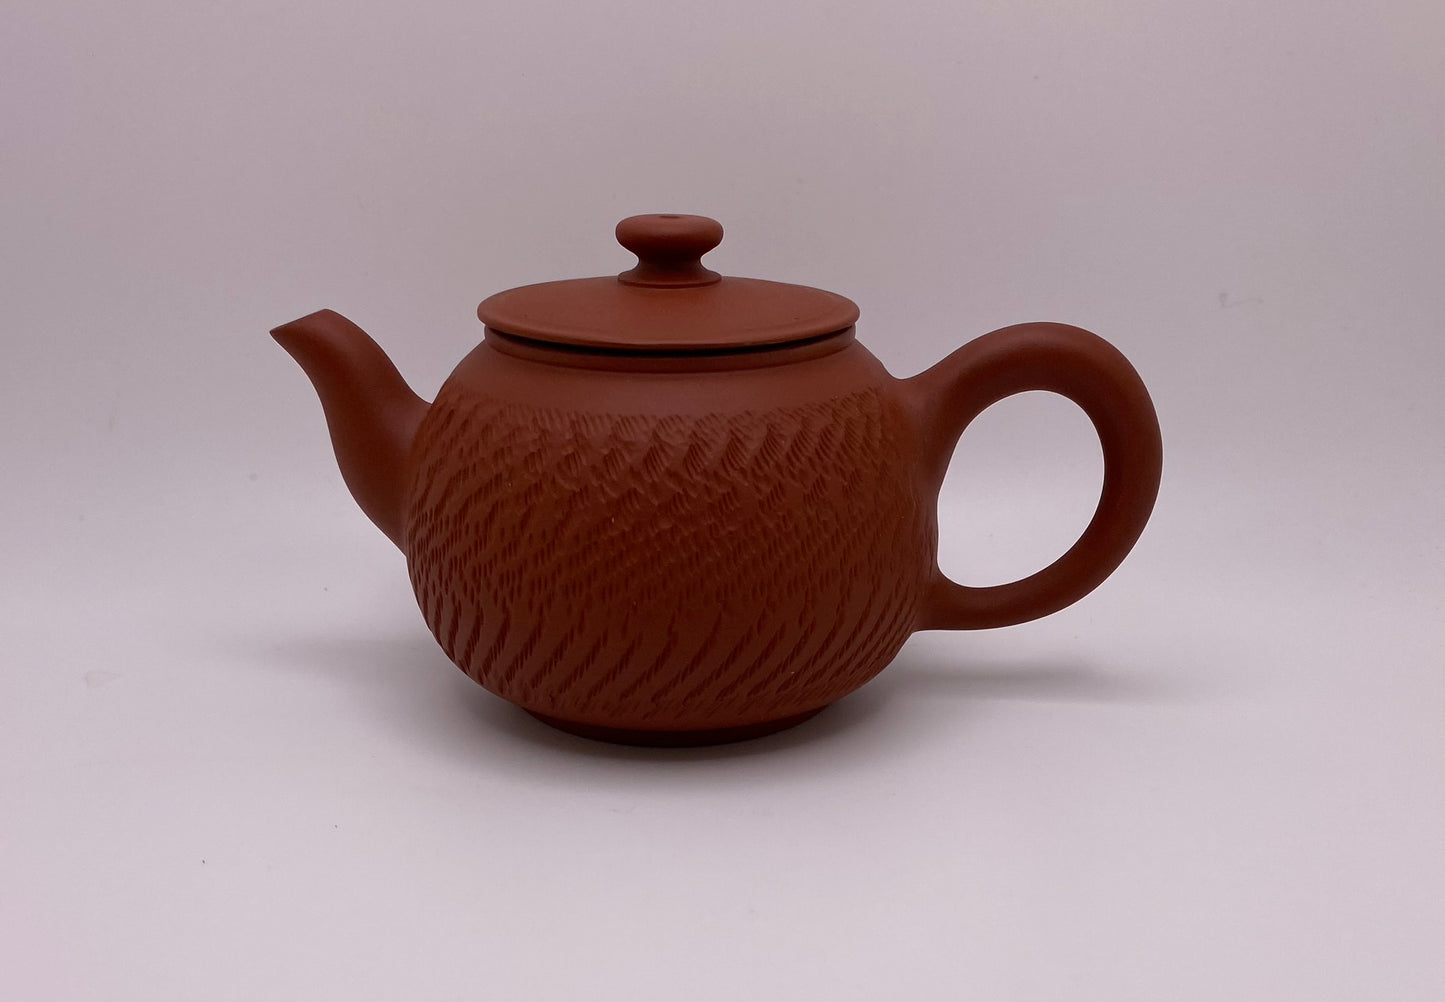 A two-handed teapot and other gadgets to tackle arthritis